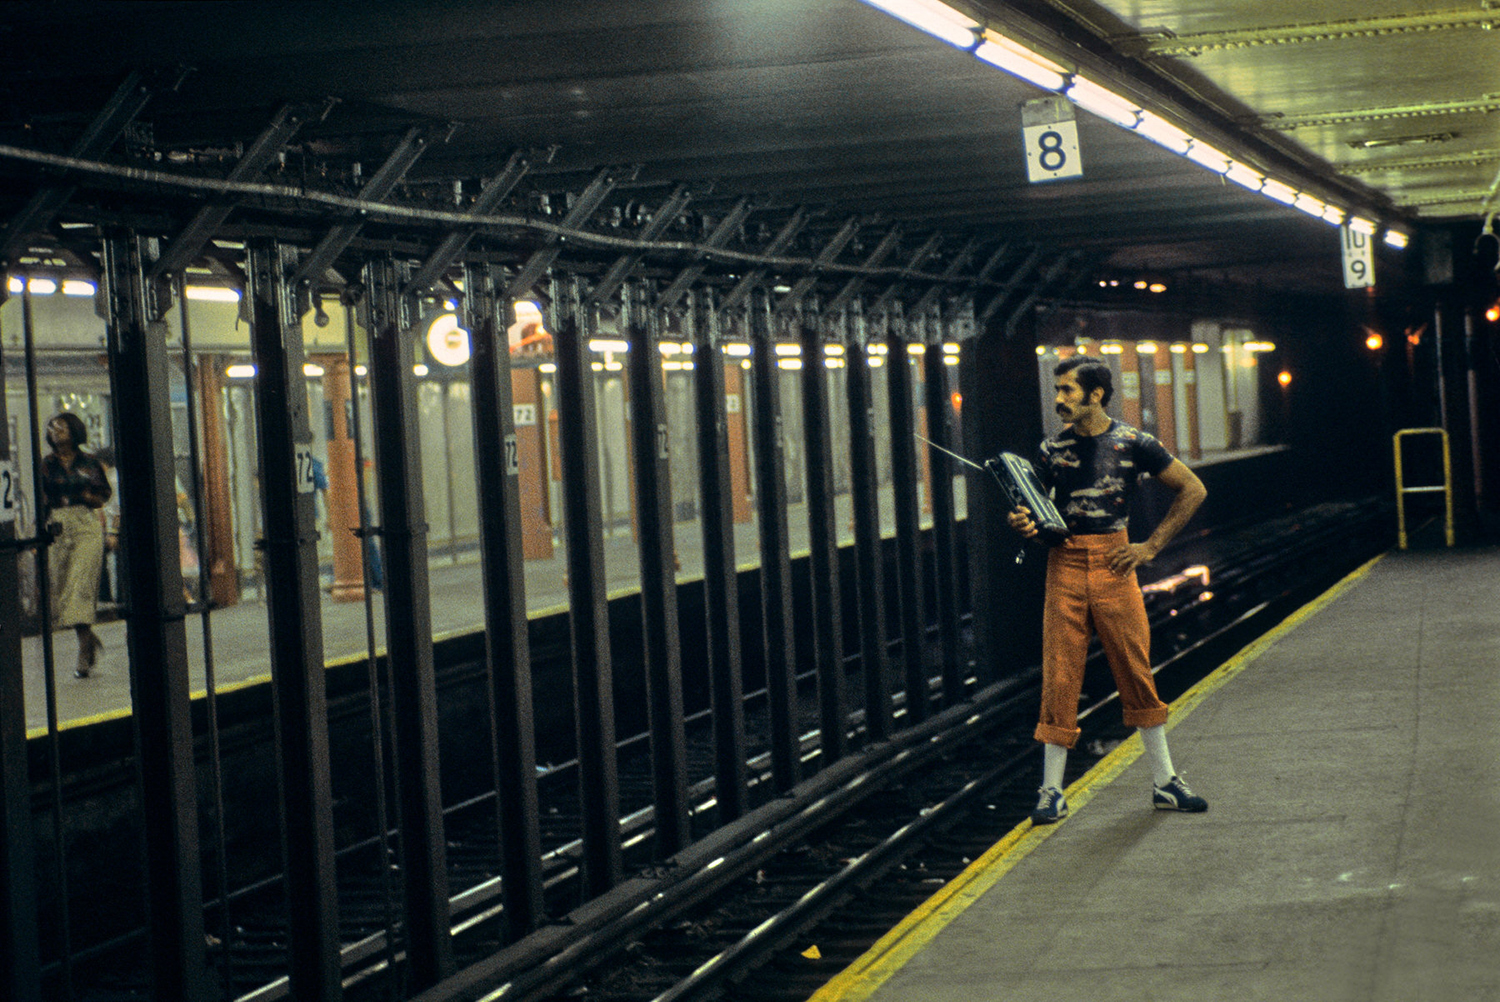 72nd Street Station West Side, New York, 1977